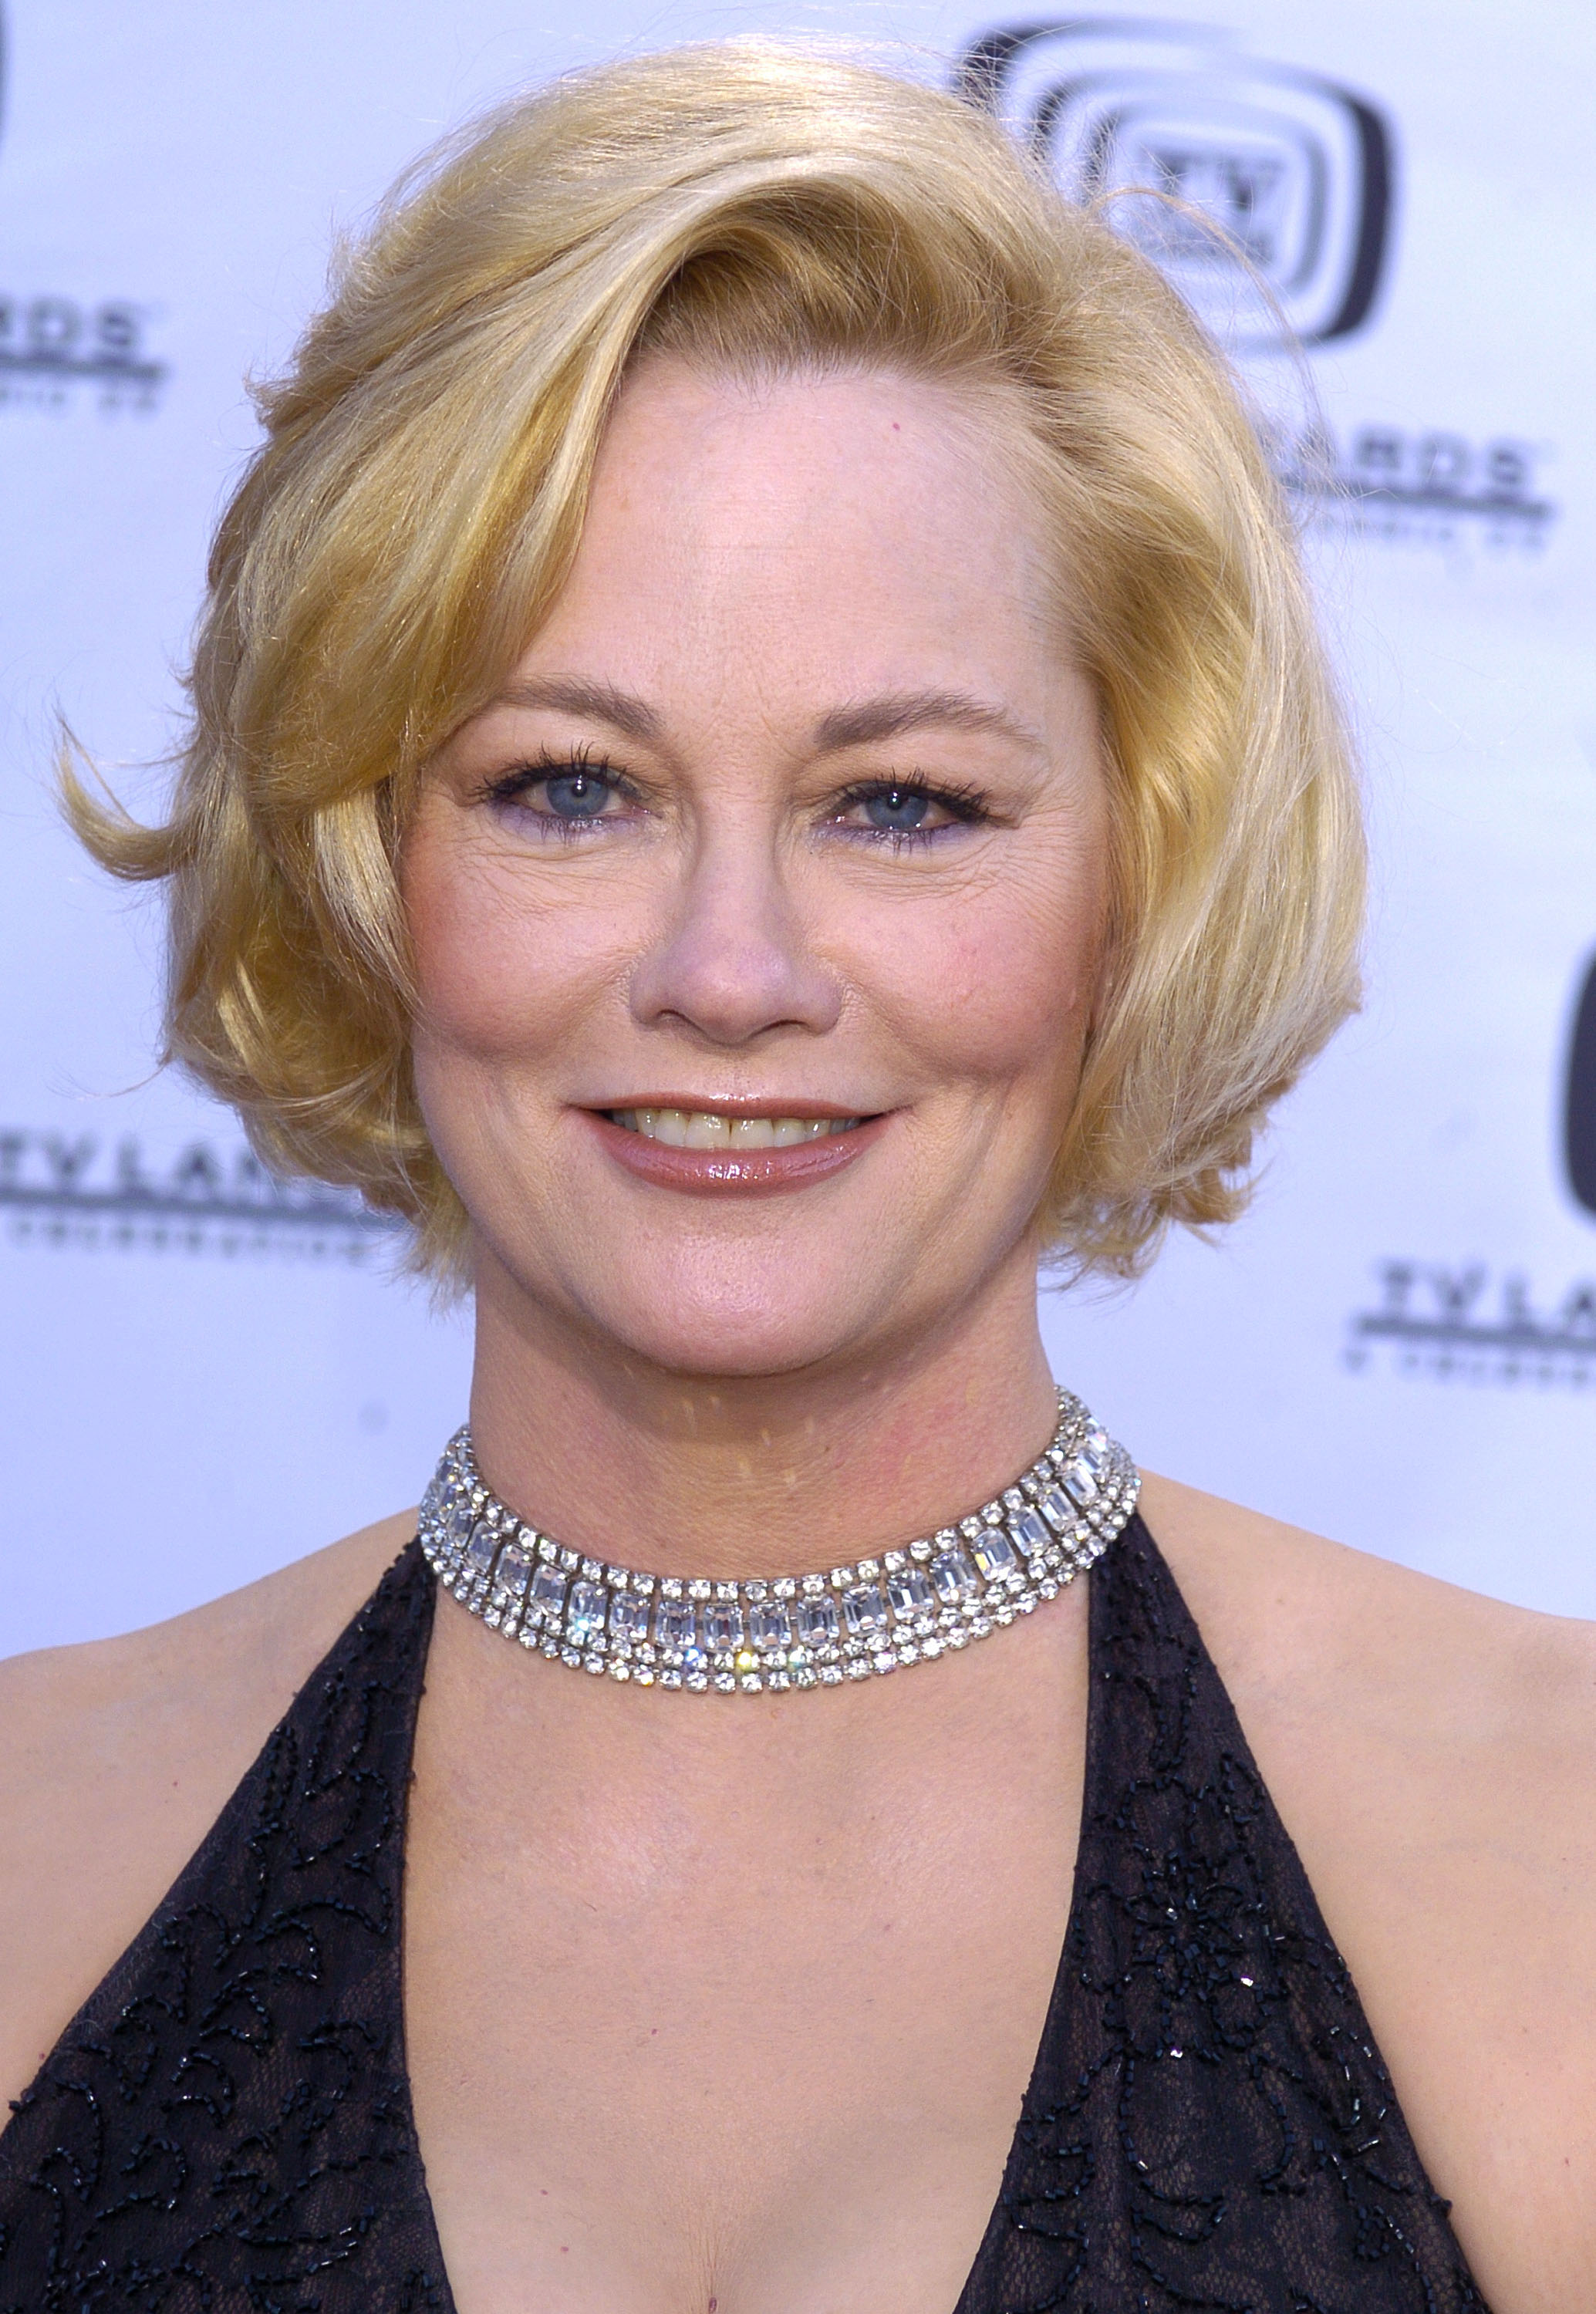 Cybill Shepherd attend the 2nd Annual TV Land Awards - Arrivals at The Hollywood Palladium on March 8, 2004, in Hollywood, California. | Source: Getty Images